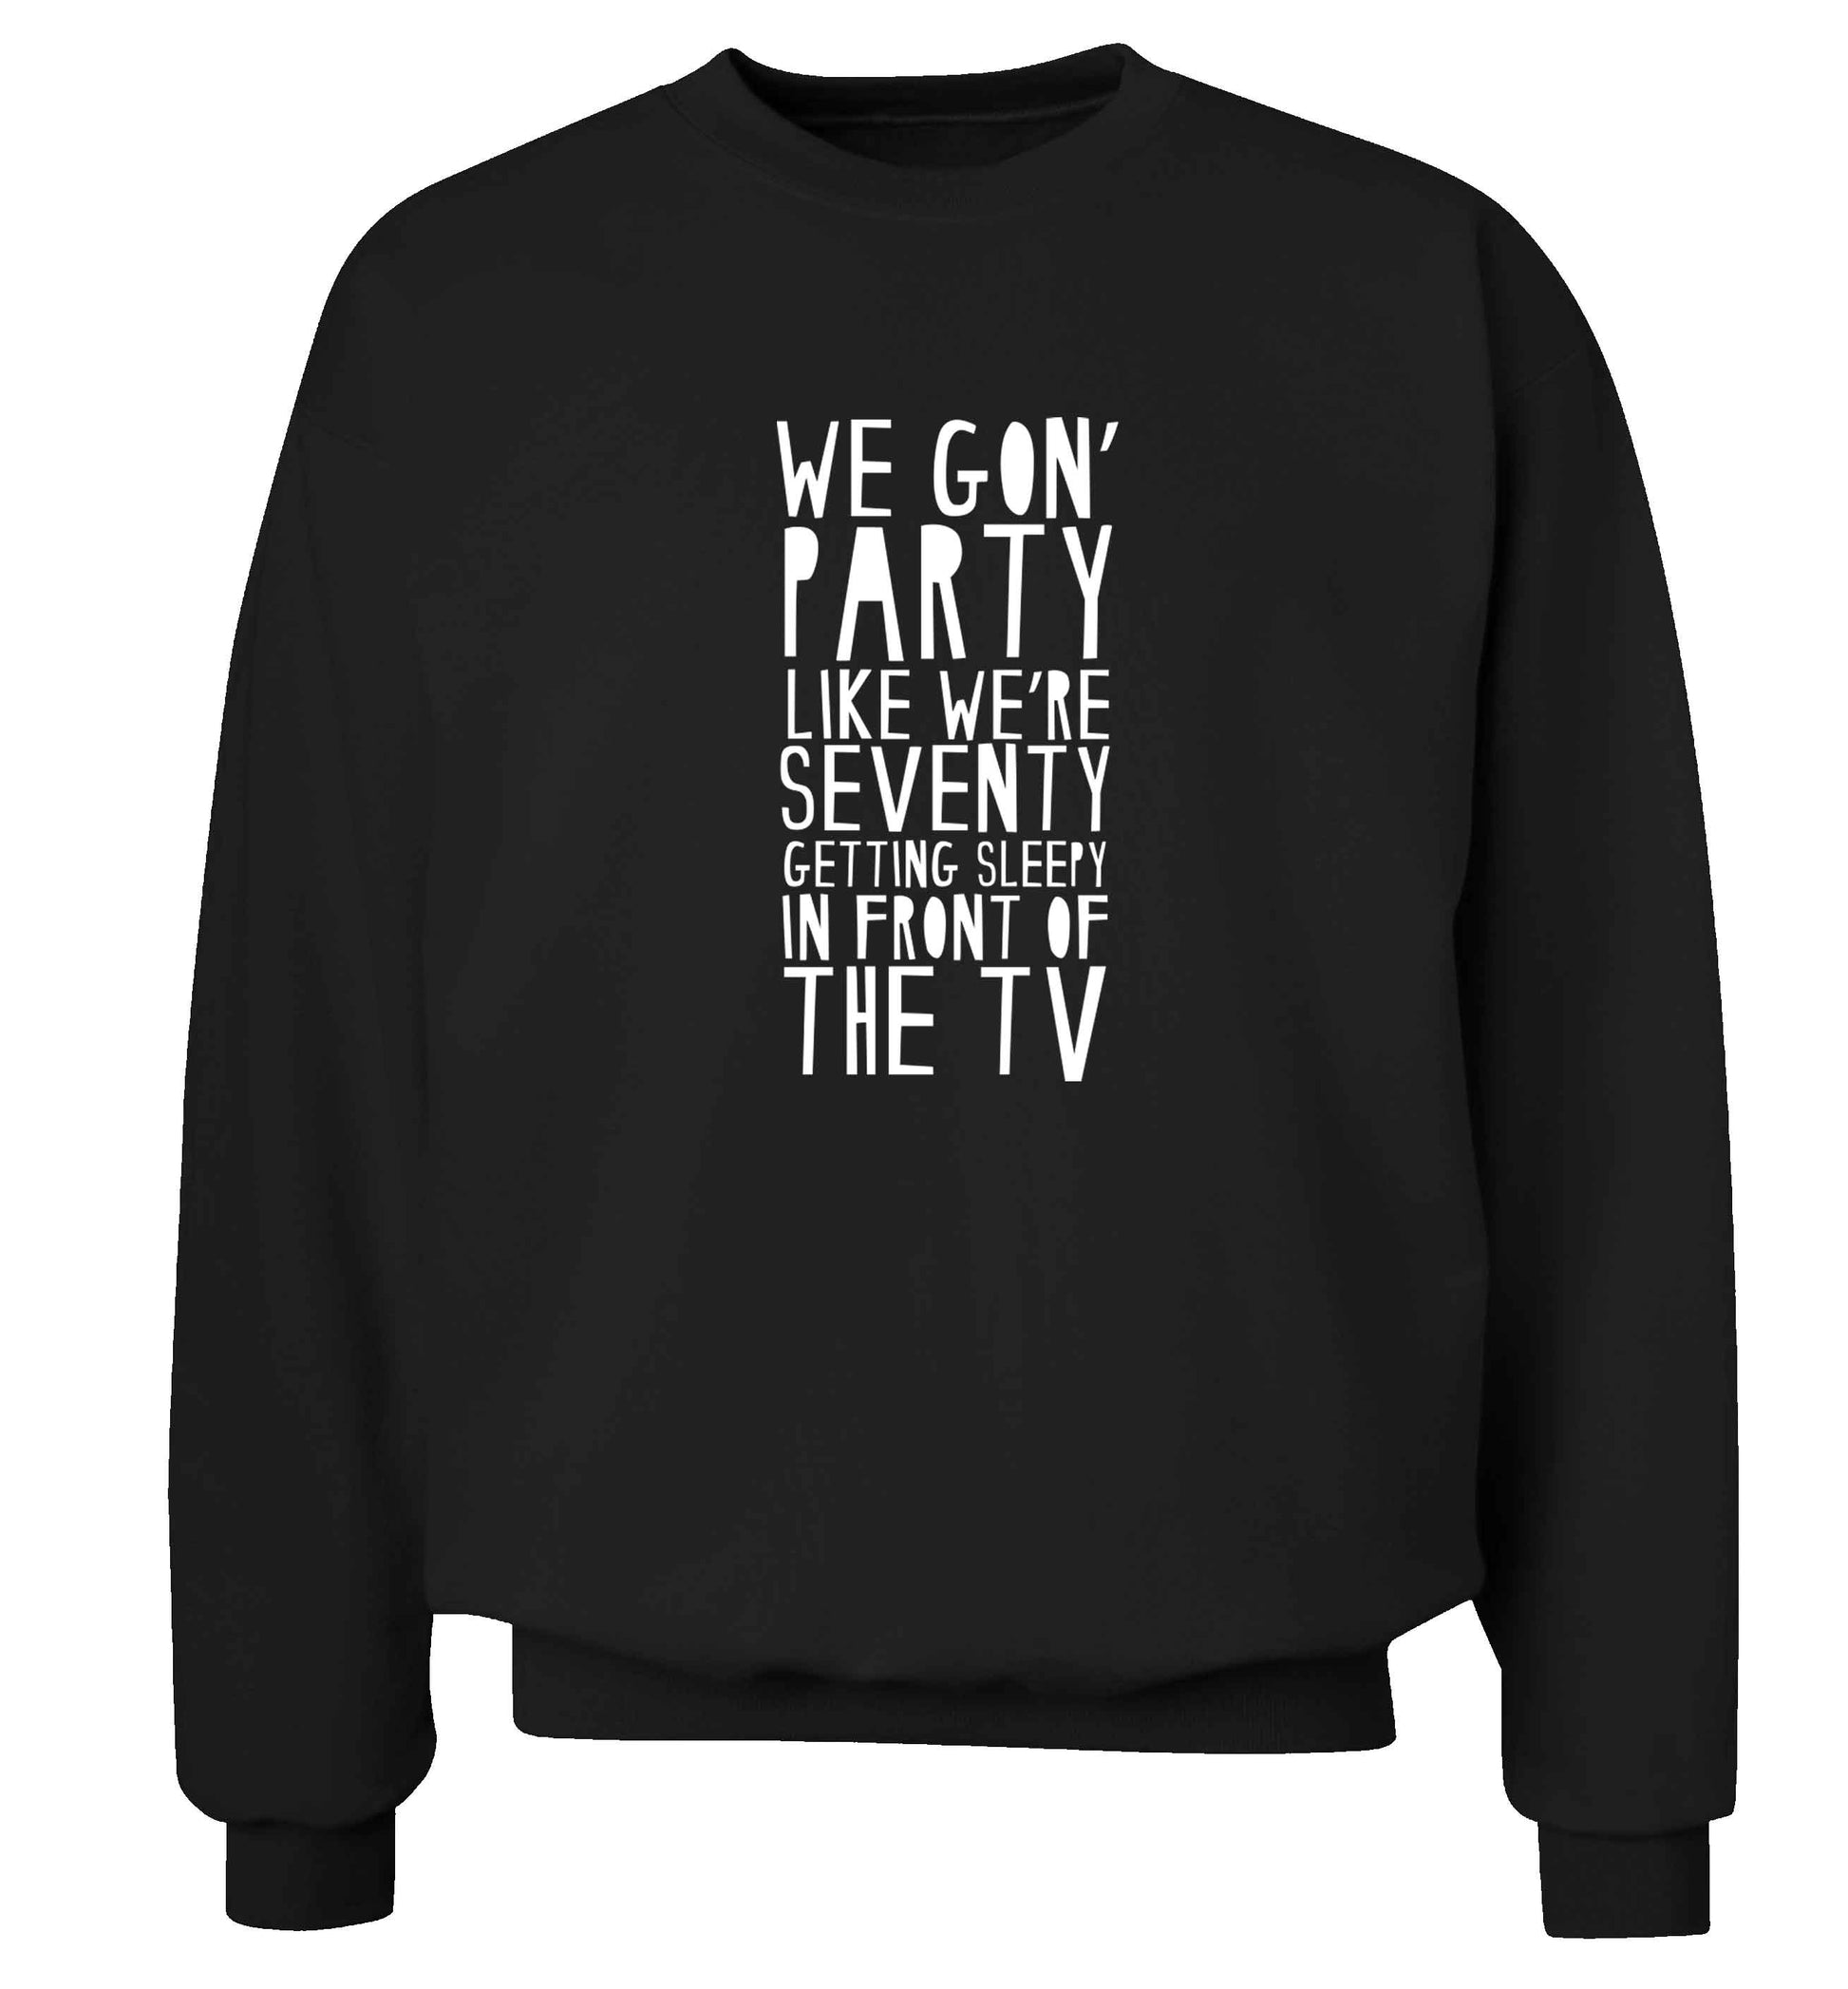 We gon' party like we're seventy getting sleepy in front of the TV adult's unisex black sweater 2XL